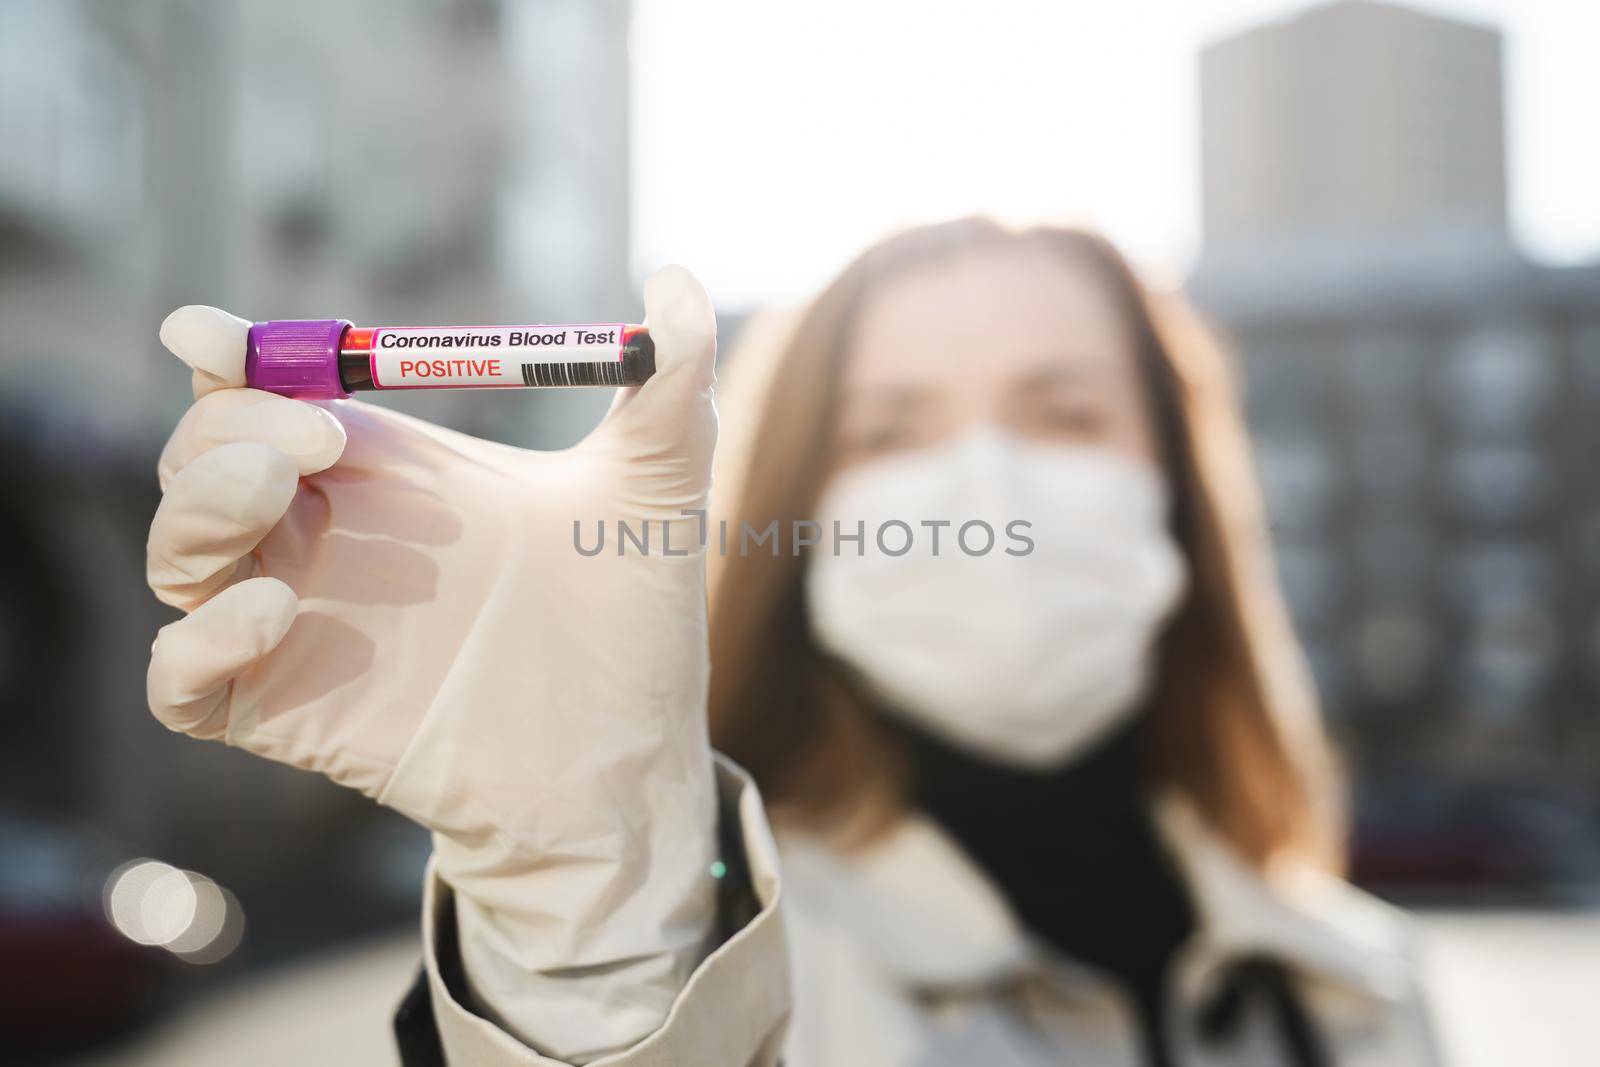 Wonan's hands holding a test tube with a blood sample for research new rapidly spreading Coronavirus Covid-19 by StudioPeace